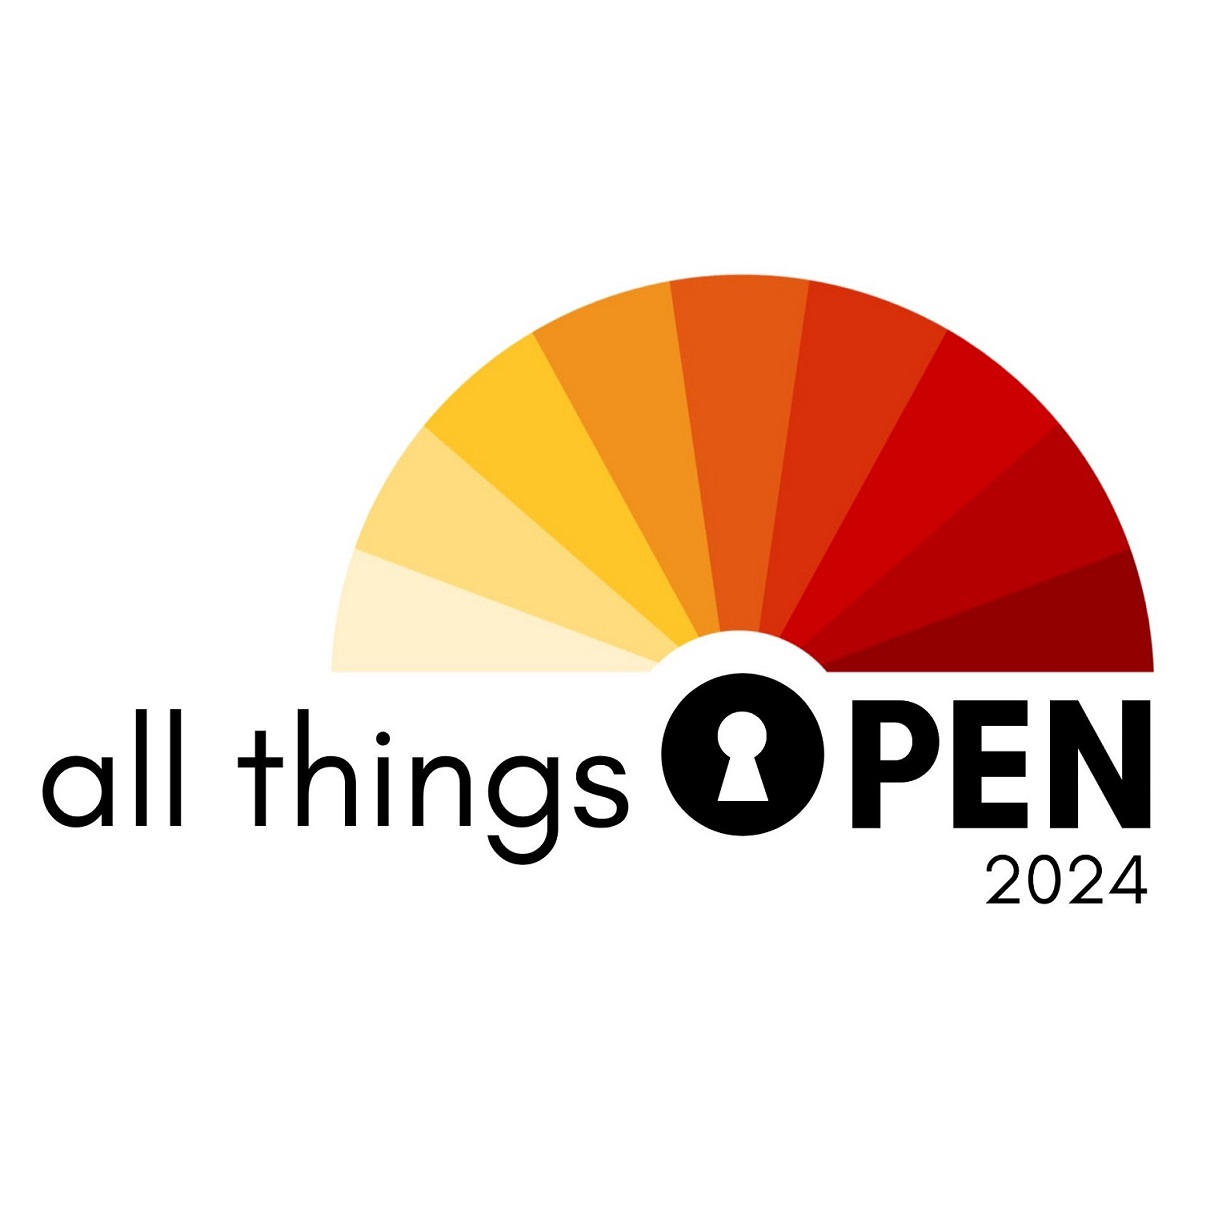 All Things Open Week: һҹƵ Libraries Hosts a Digital Conference Exploring Open Access